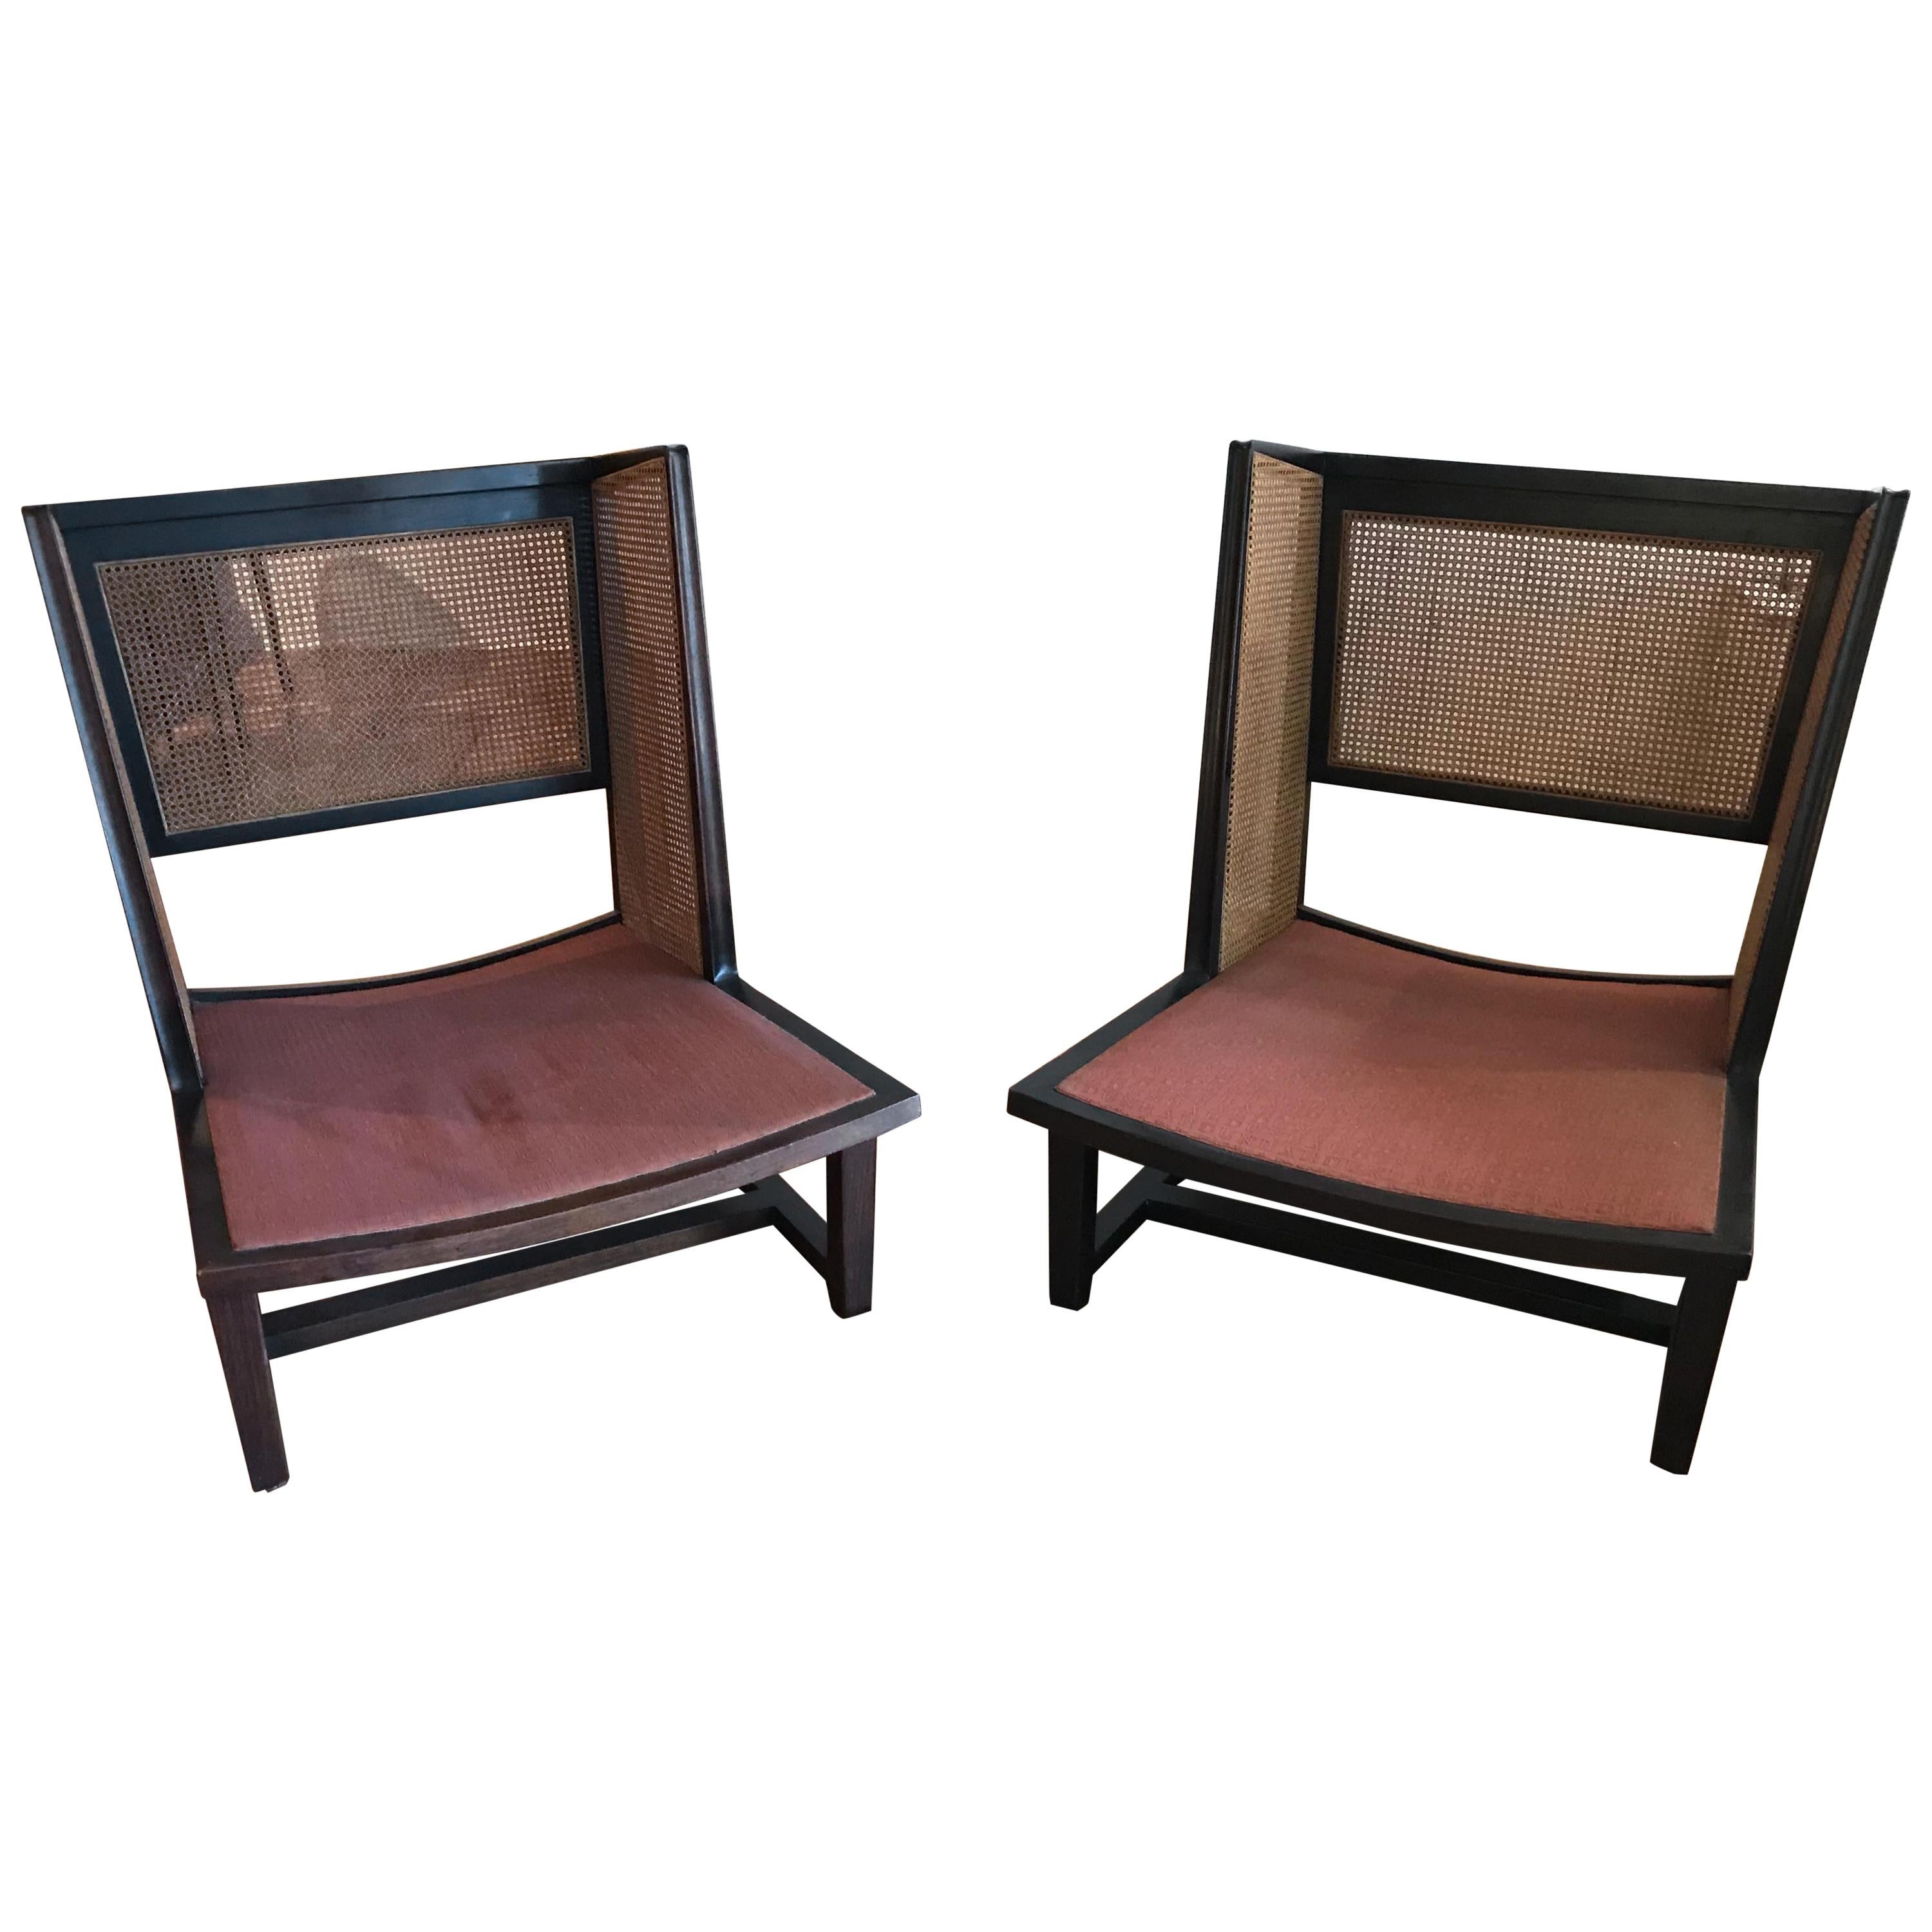 Edward Wormley for Dunbar Model 6016 Wing Chairs For Sale